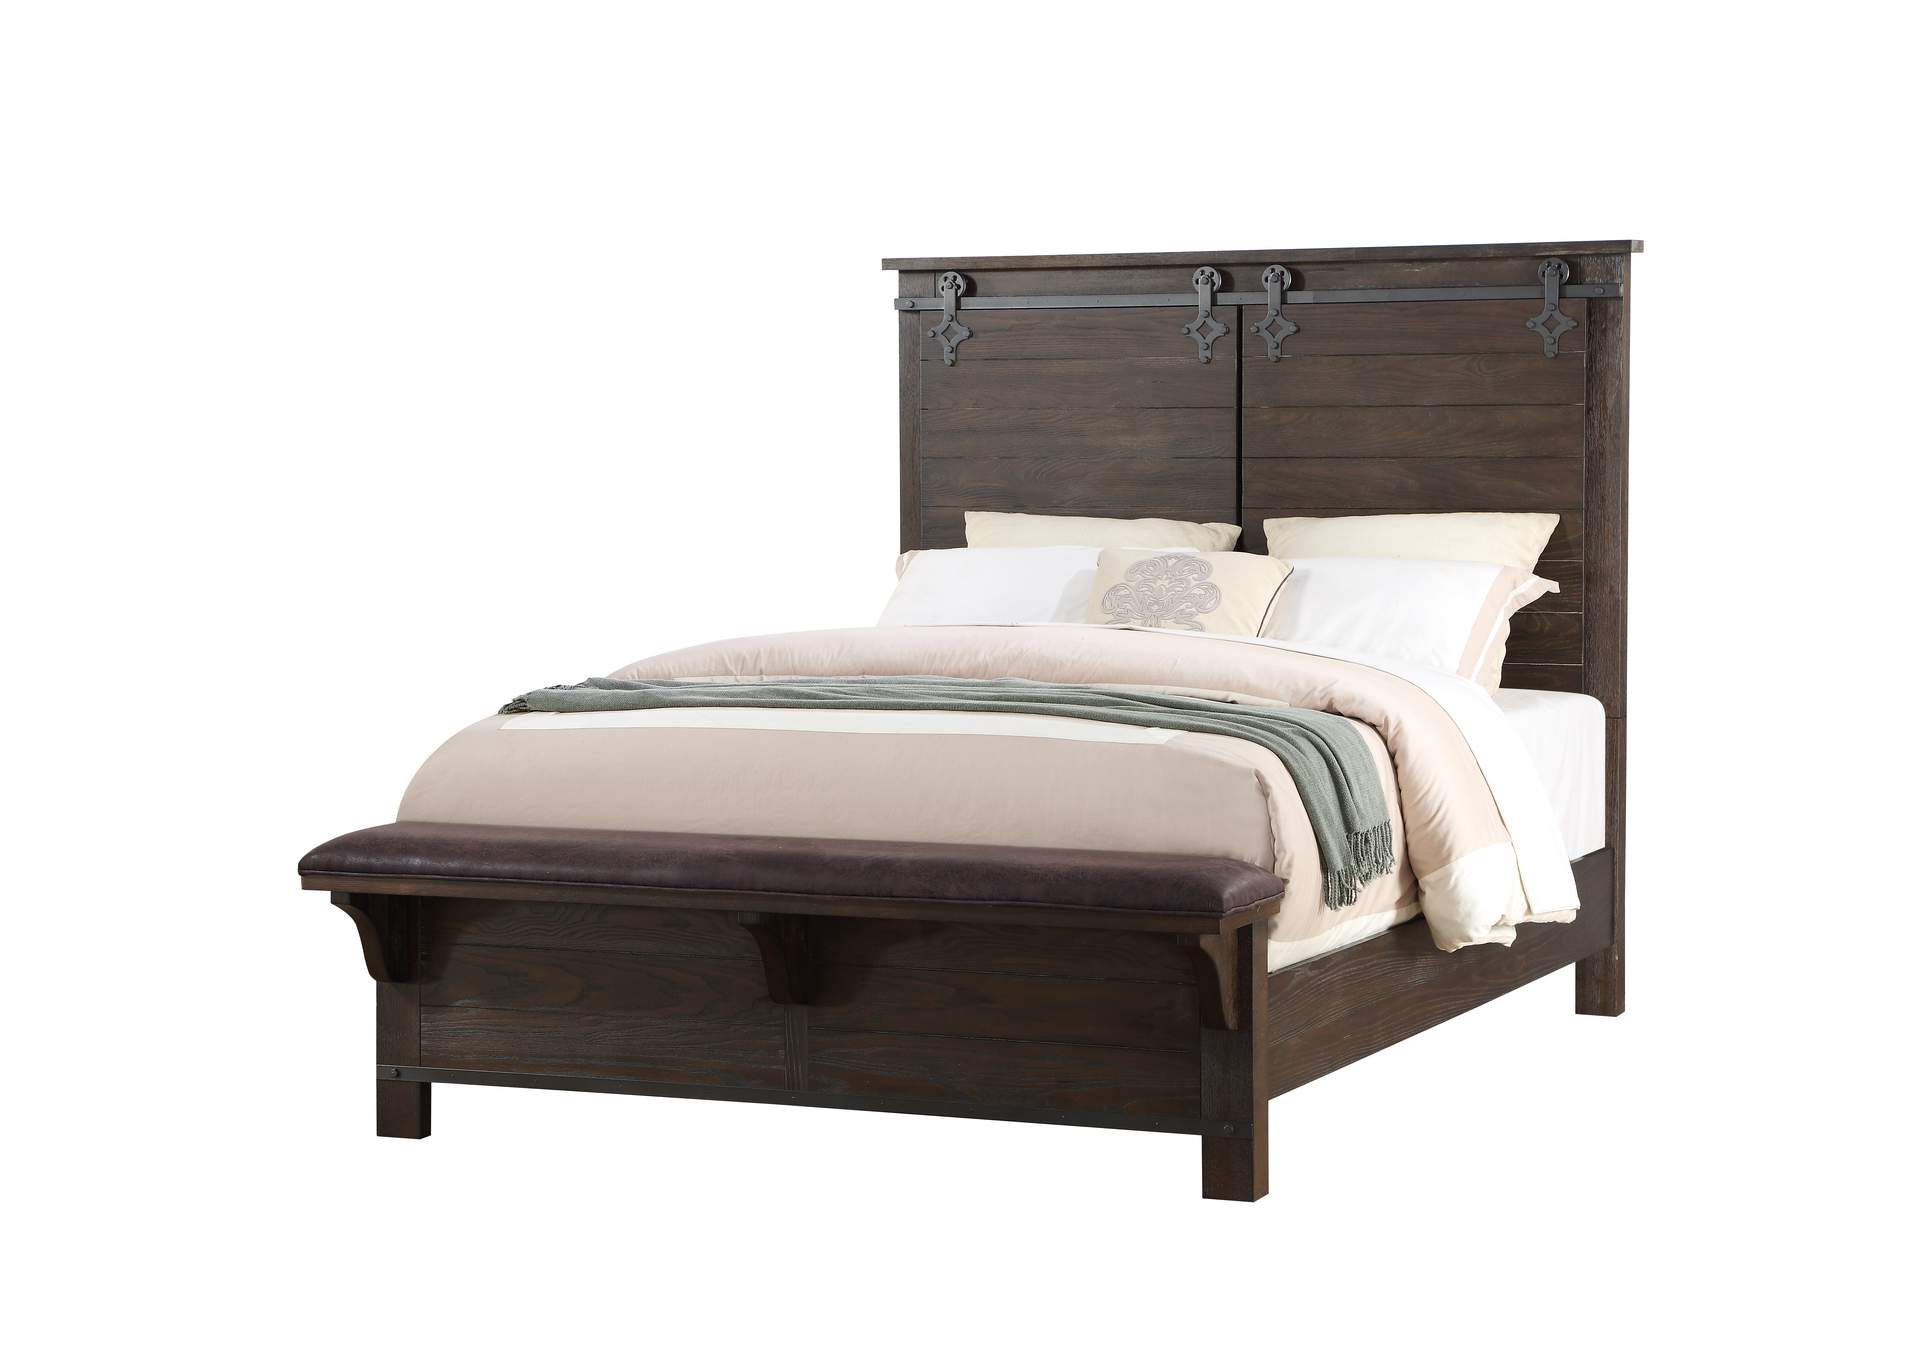 Newton Queen Bed,Emerald Home Furnishings